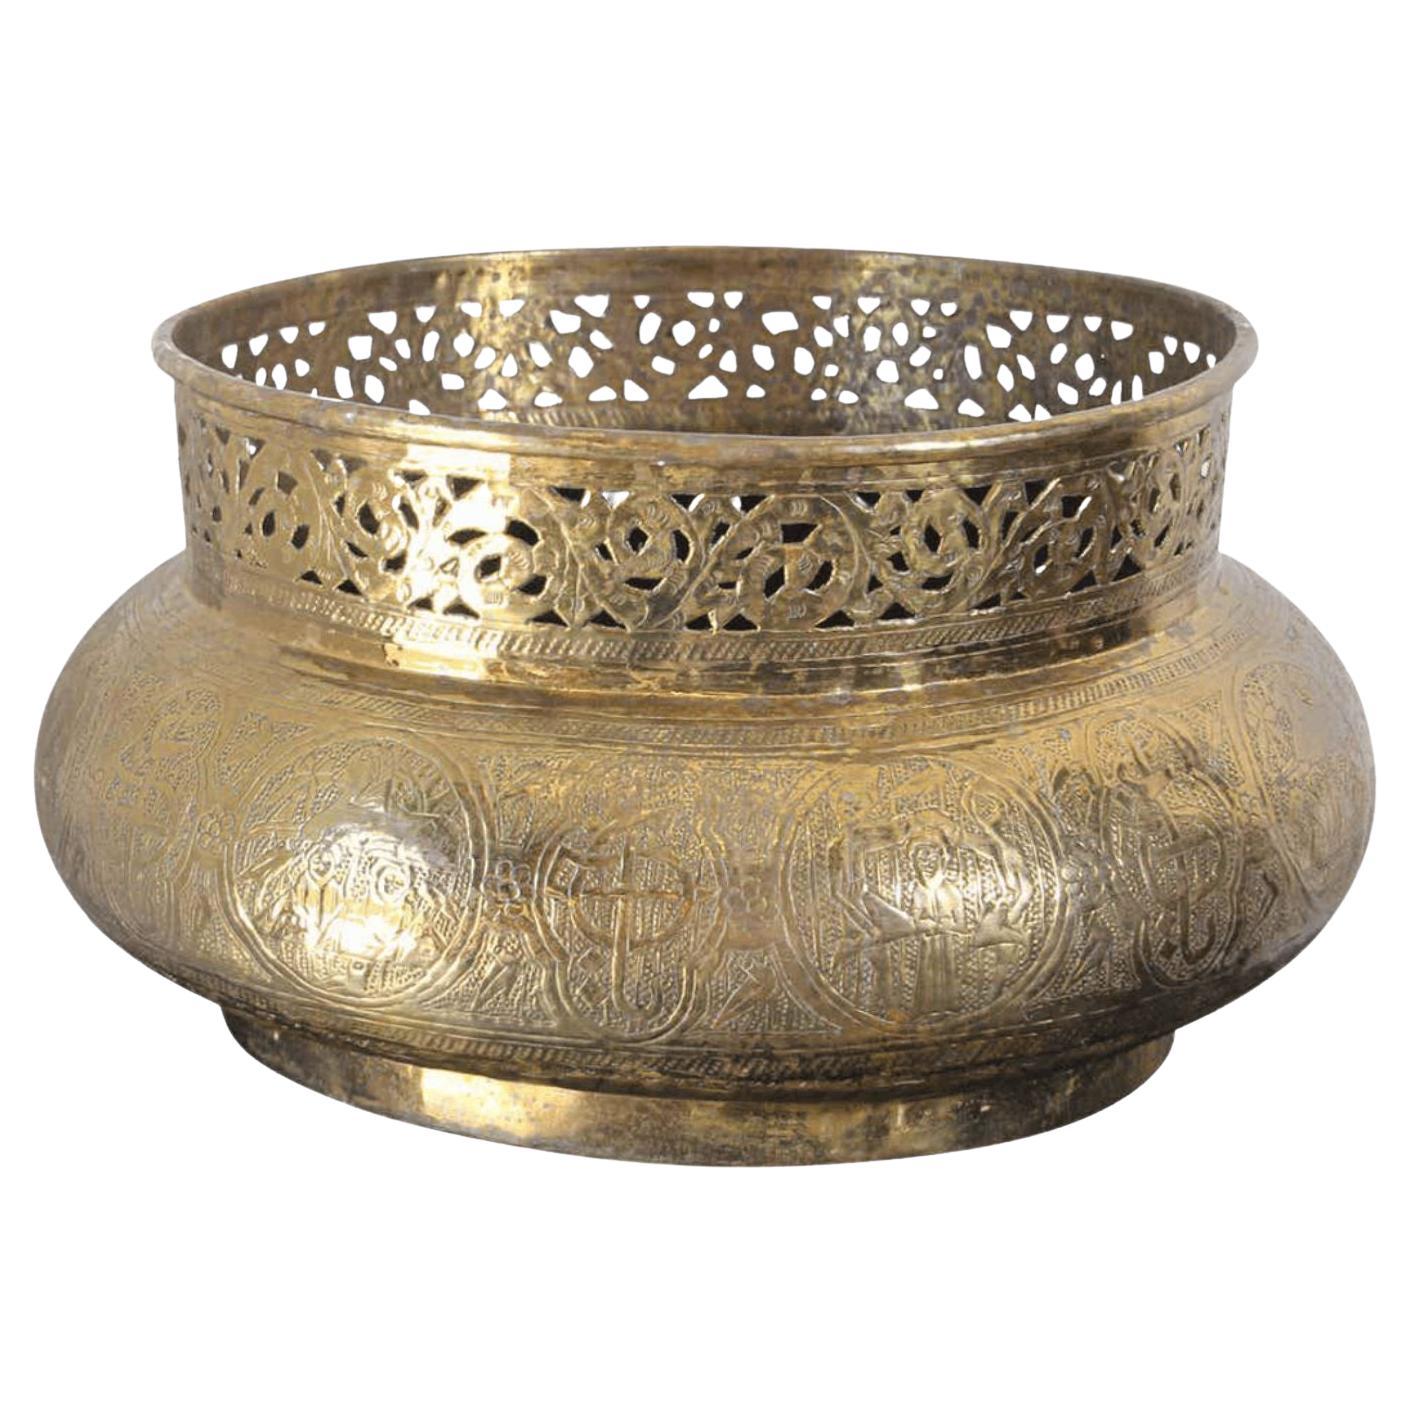 Large Fine Antique Islamic Middle Eastern Moorish Brass Bowl For Sale